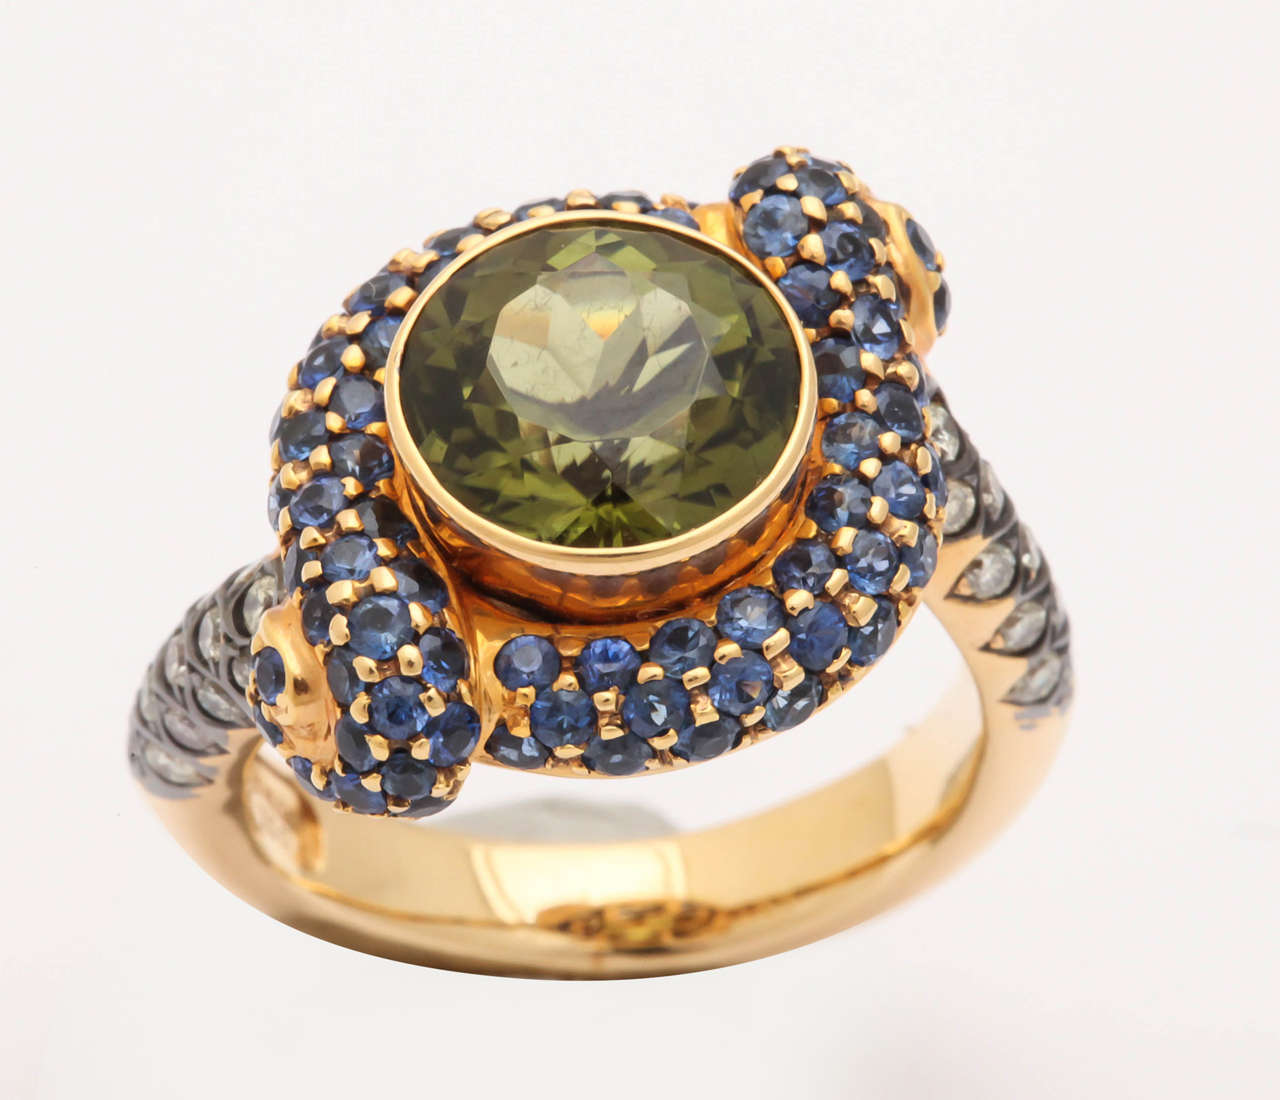 This uniquely shaped 'knot' ring is made of 18 kt orange gold. The color is in between rose gold and 18 kt yellow gold and makes the colored stones pop.
The center round green tourmaline is 3.67 ct, round sapphires, pave set,1.81 ct and white